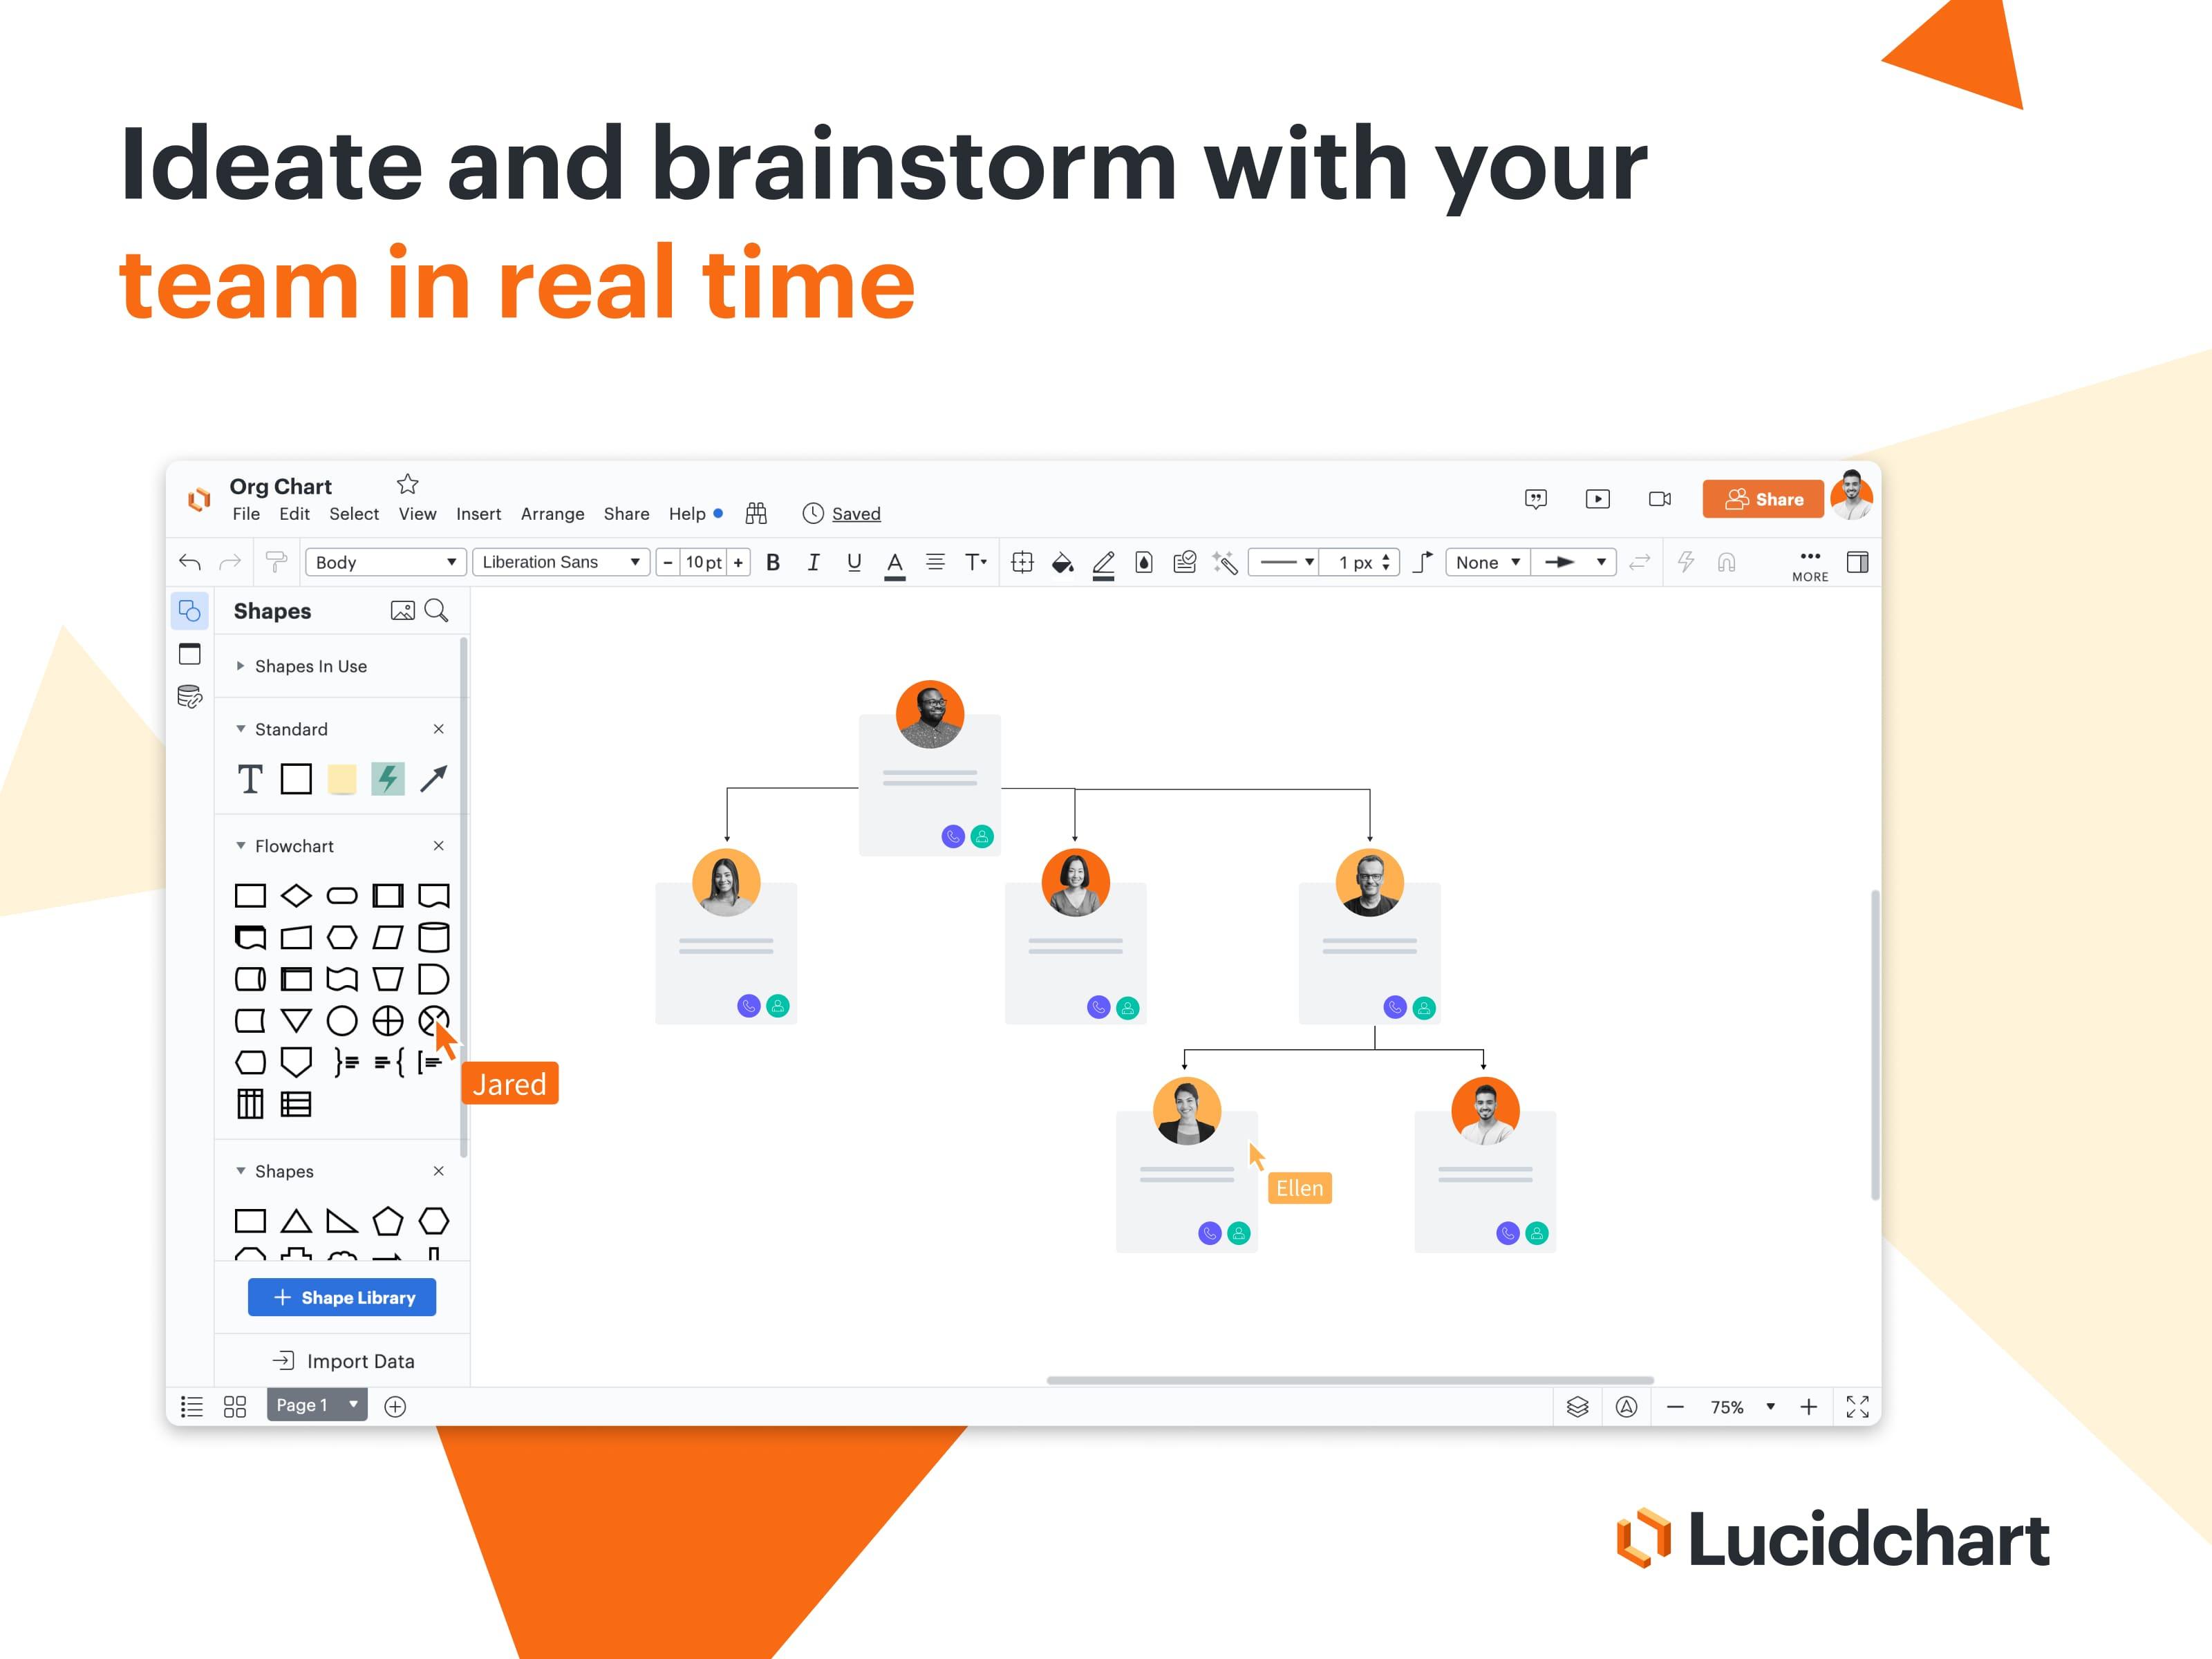 Lucidchart - Brainstorm, keep and organize your ideas in a collaborative tool in real-time